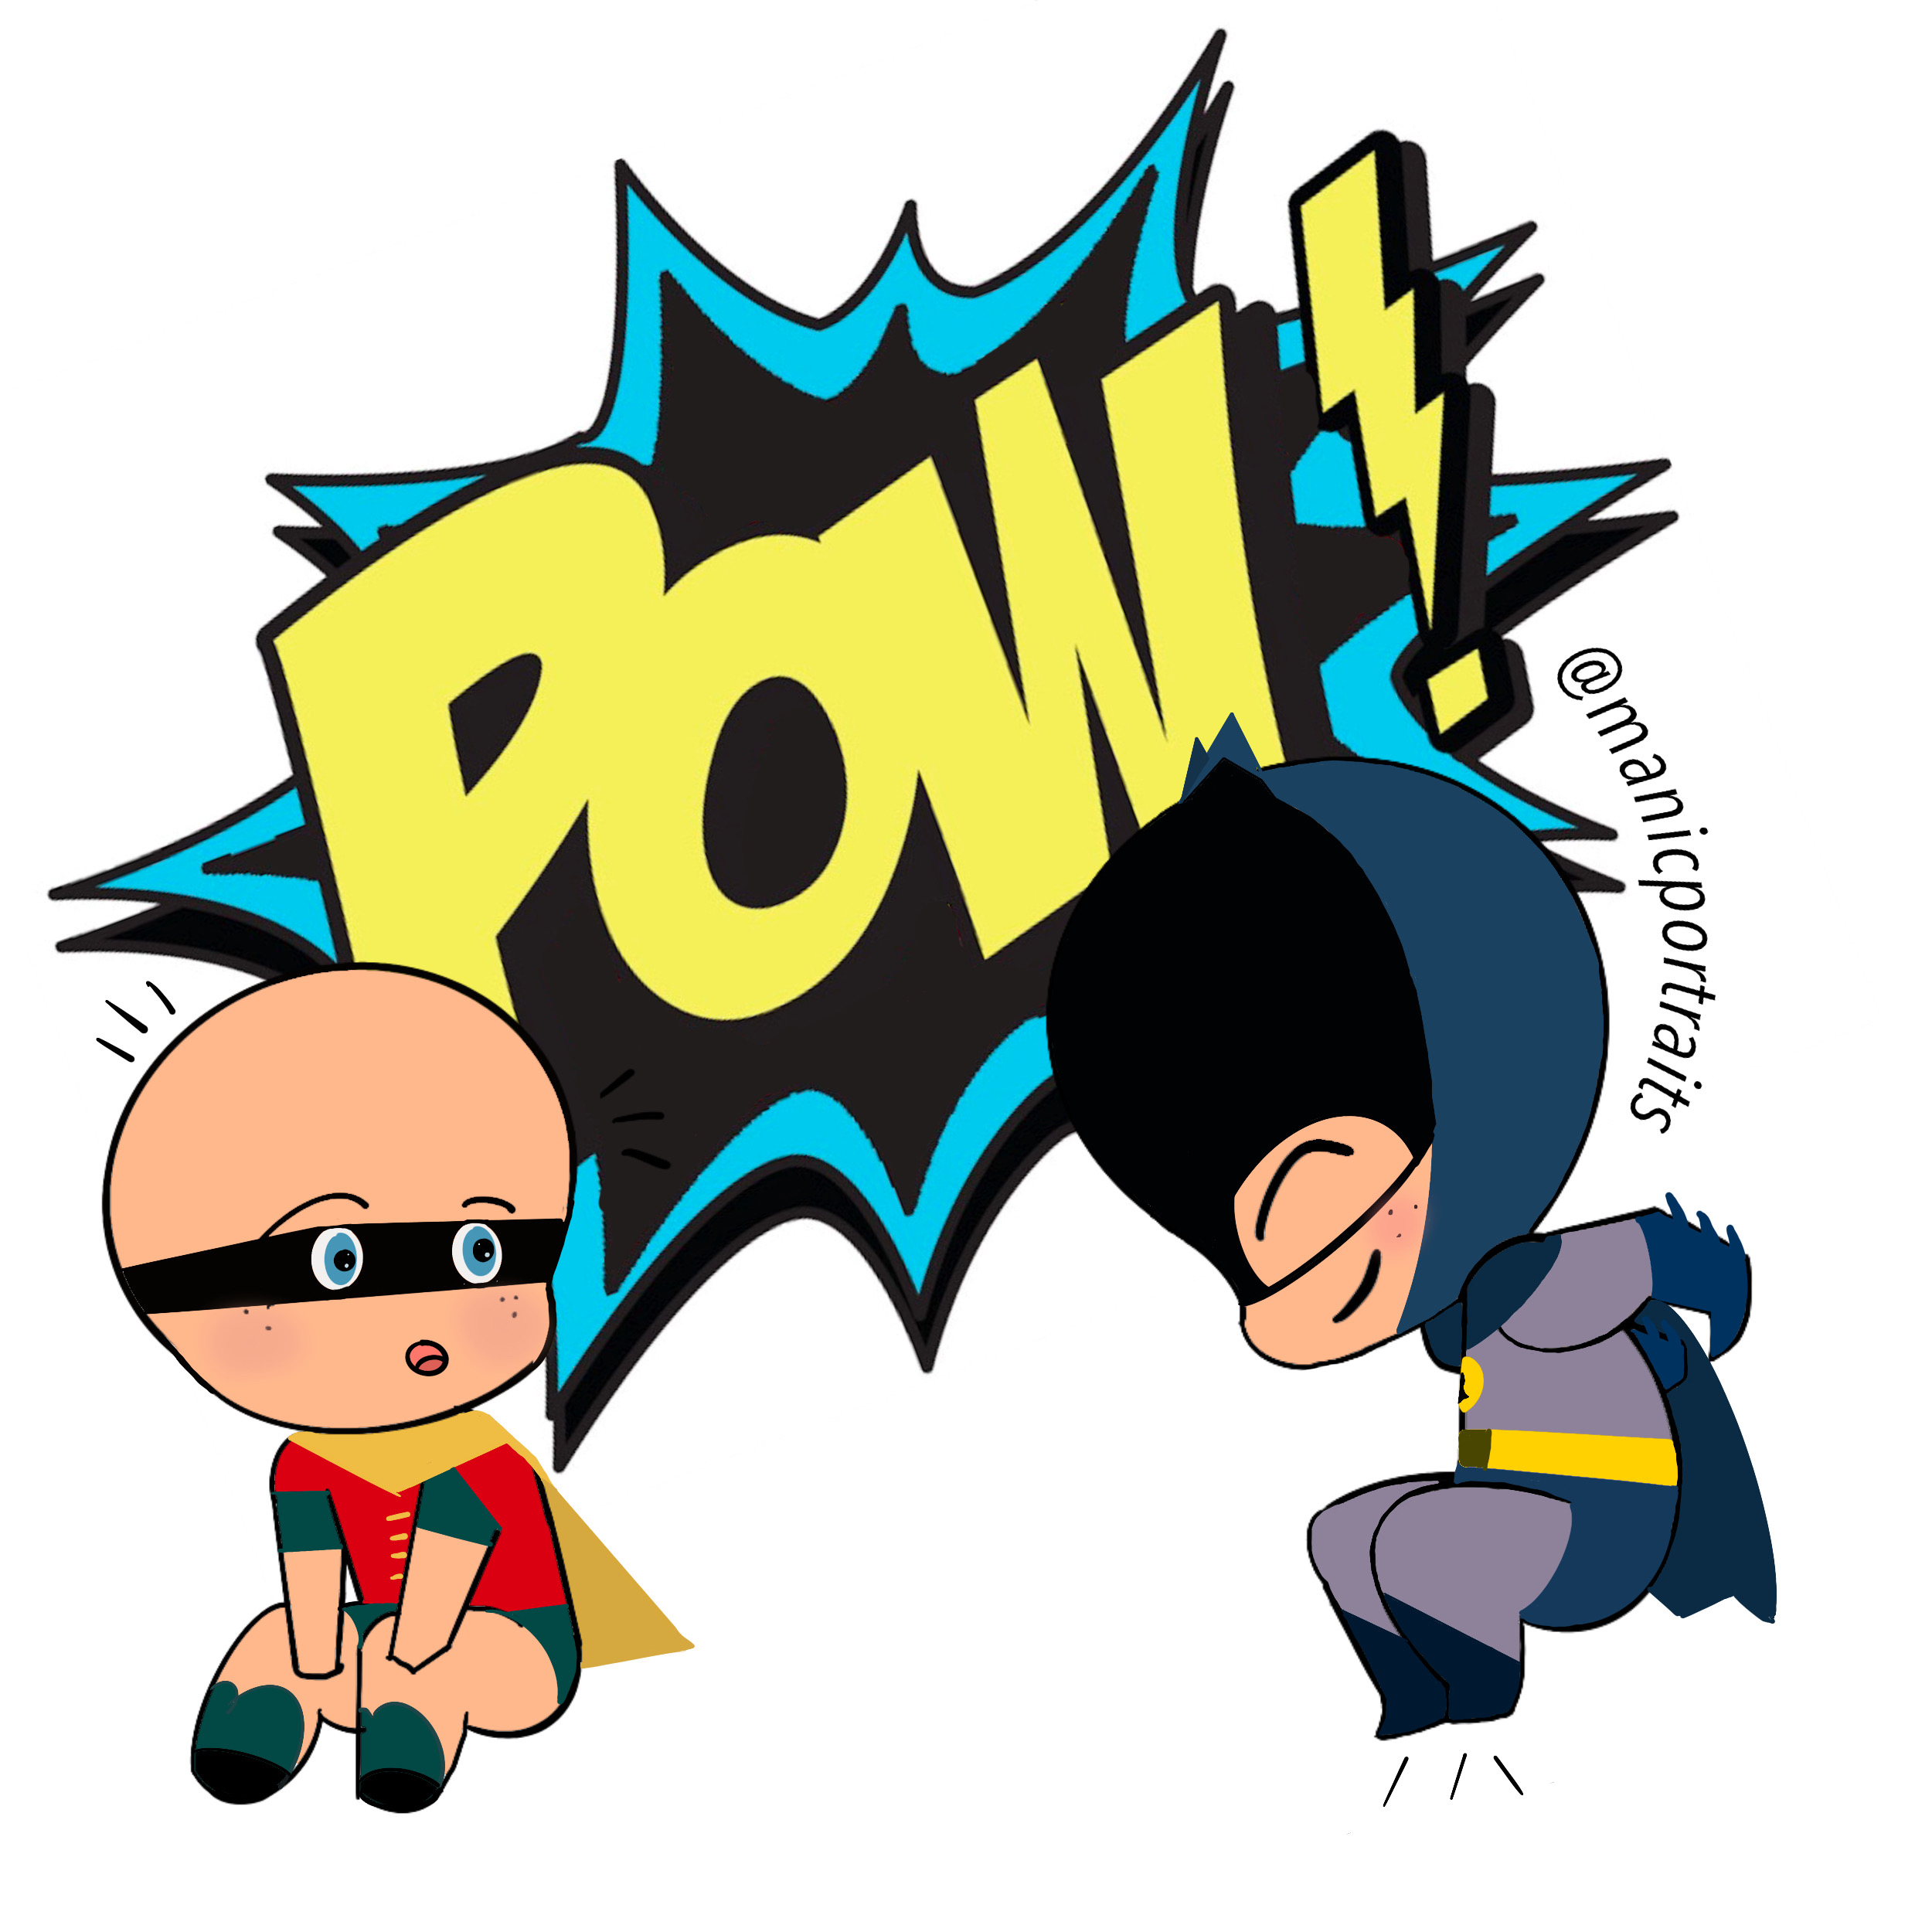 Baby batman and robin by manicportraits0 on DeviantArt